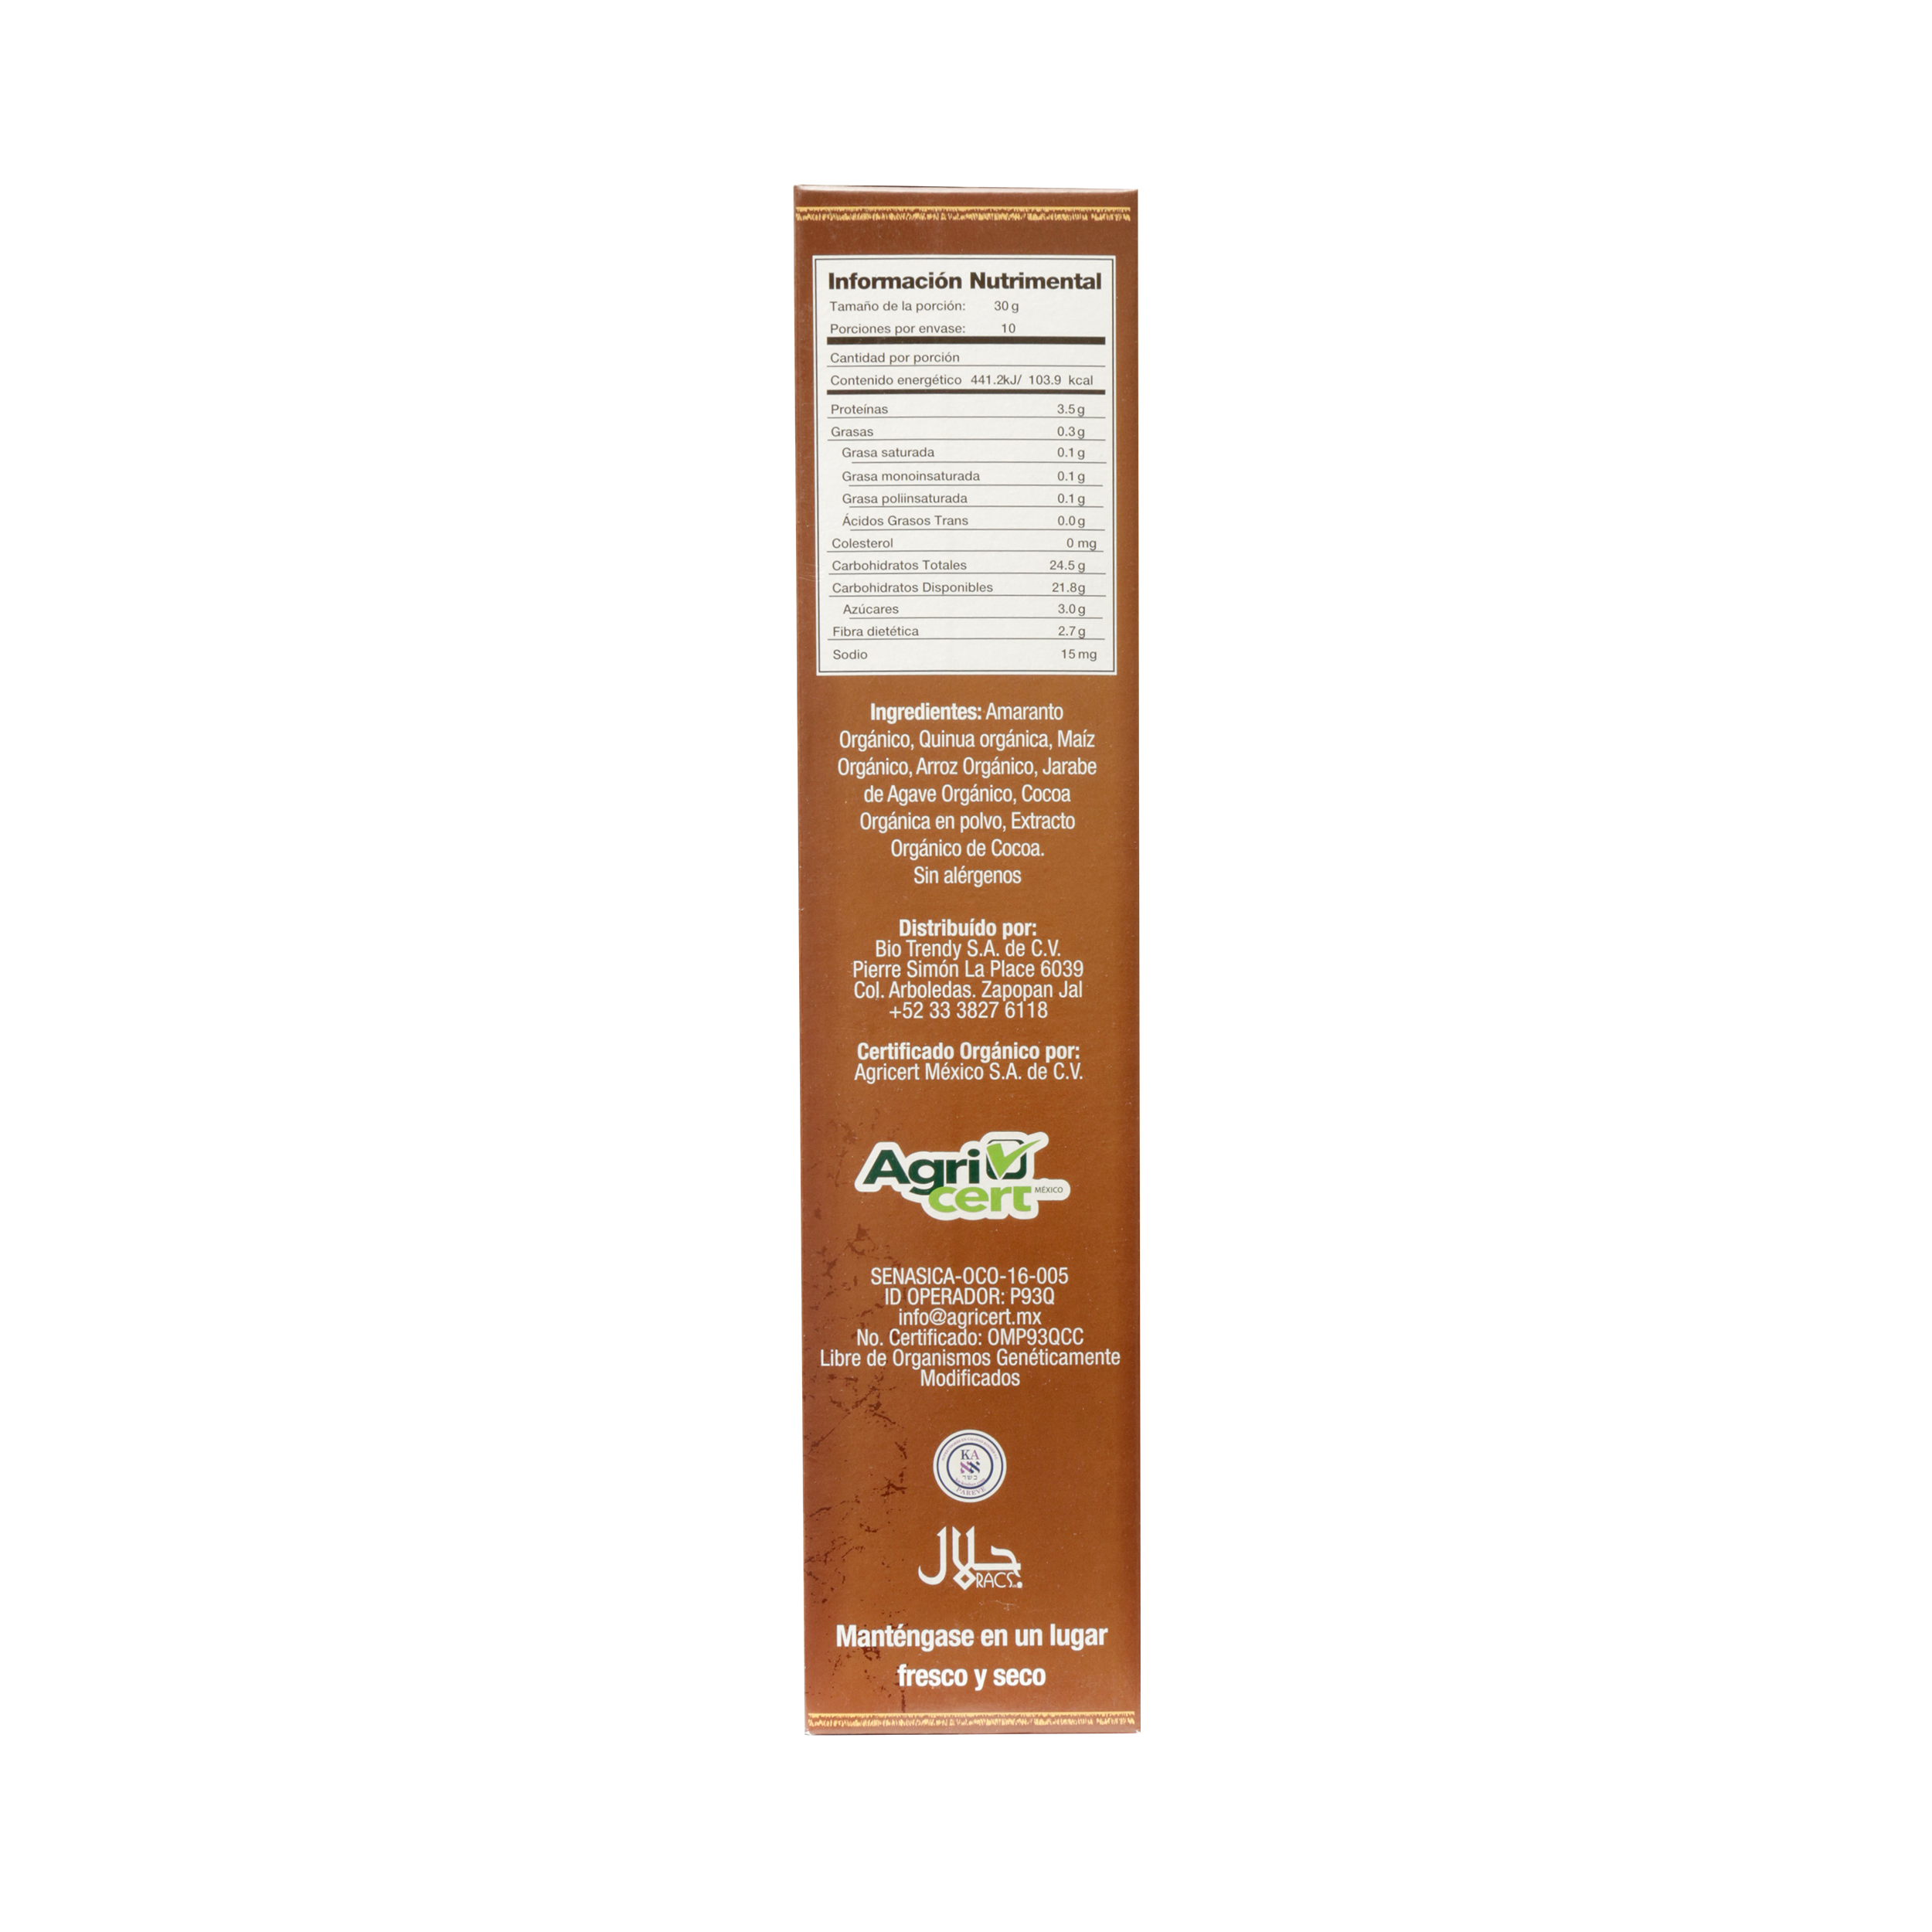 Vivente - Cereal grains for you chocolate 325 G